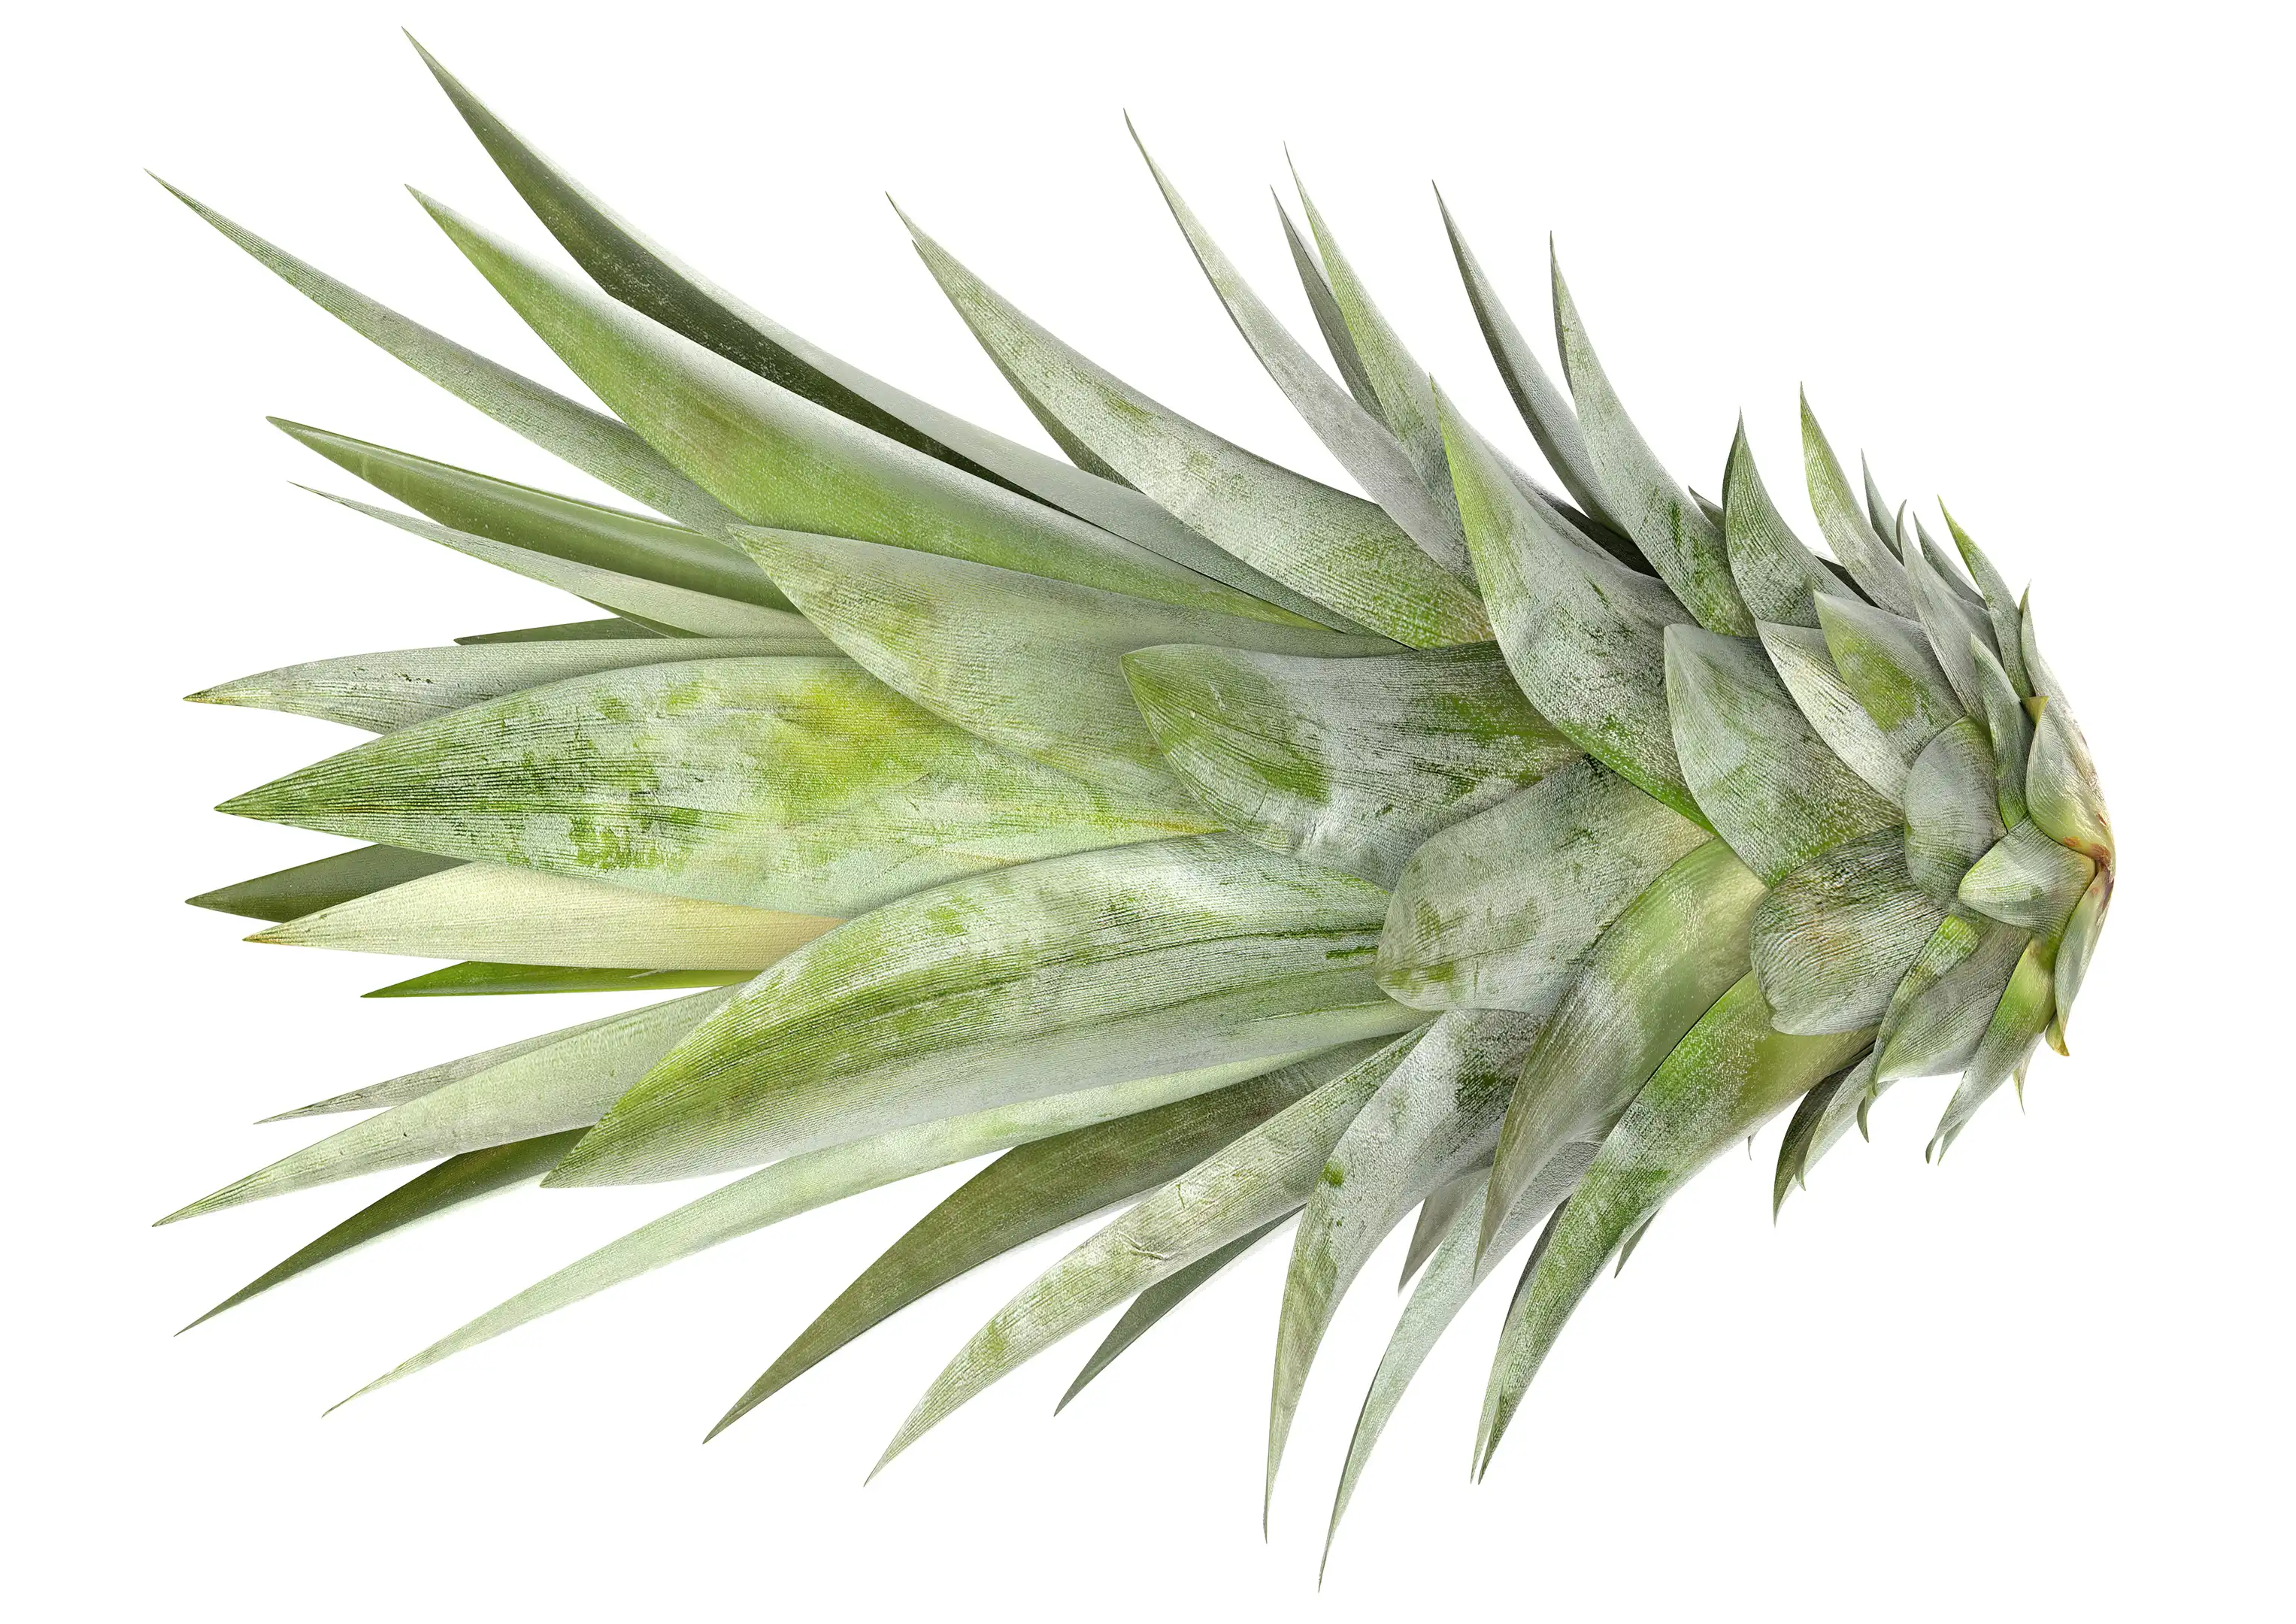 High-res close-up shot of pineapple crown green foliage.